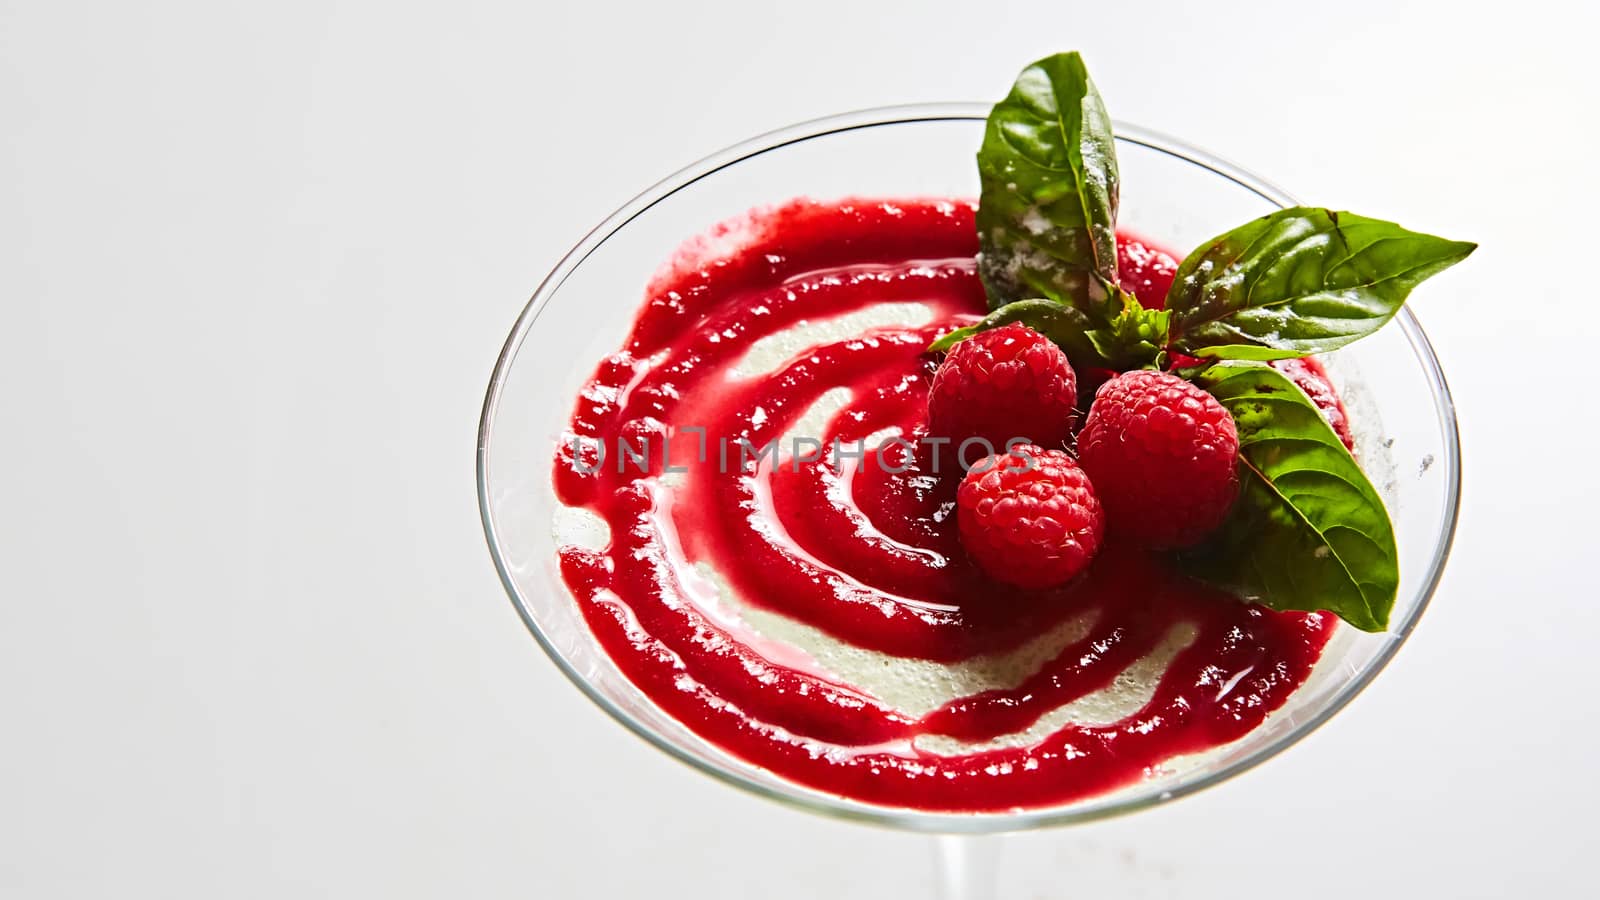 Delicious Italian dessert Panna Cotta with raspberry in small transparent glass.